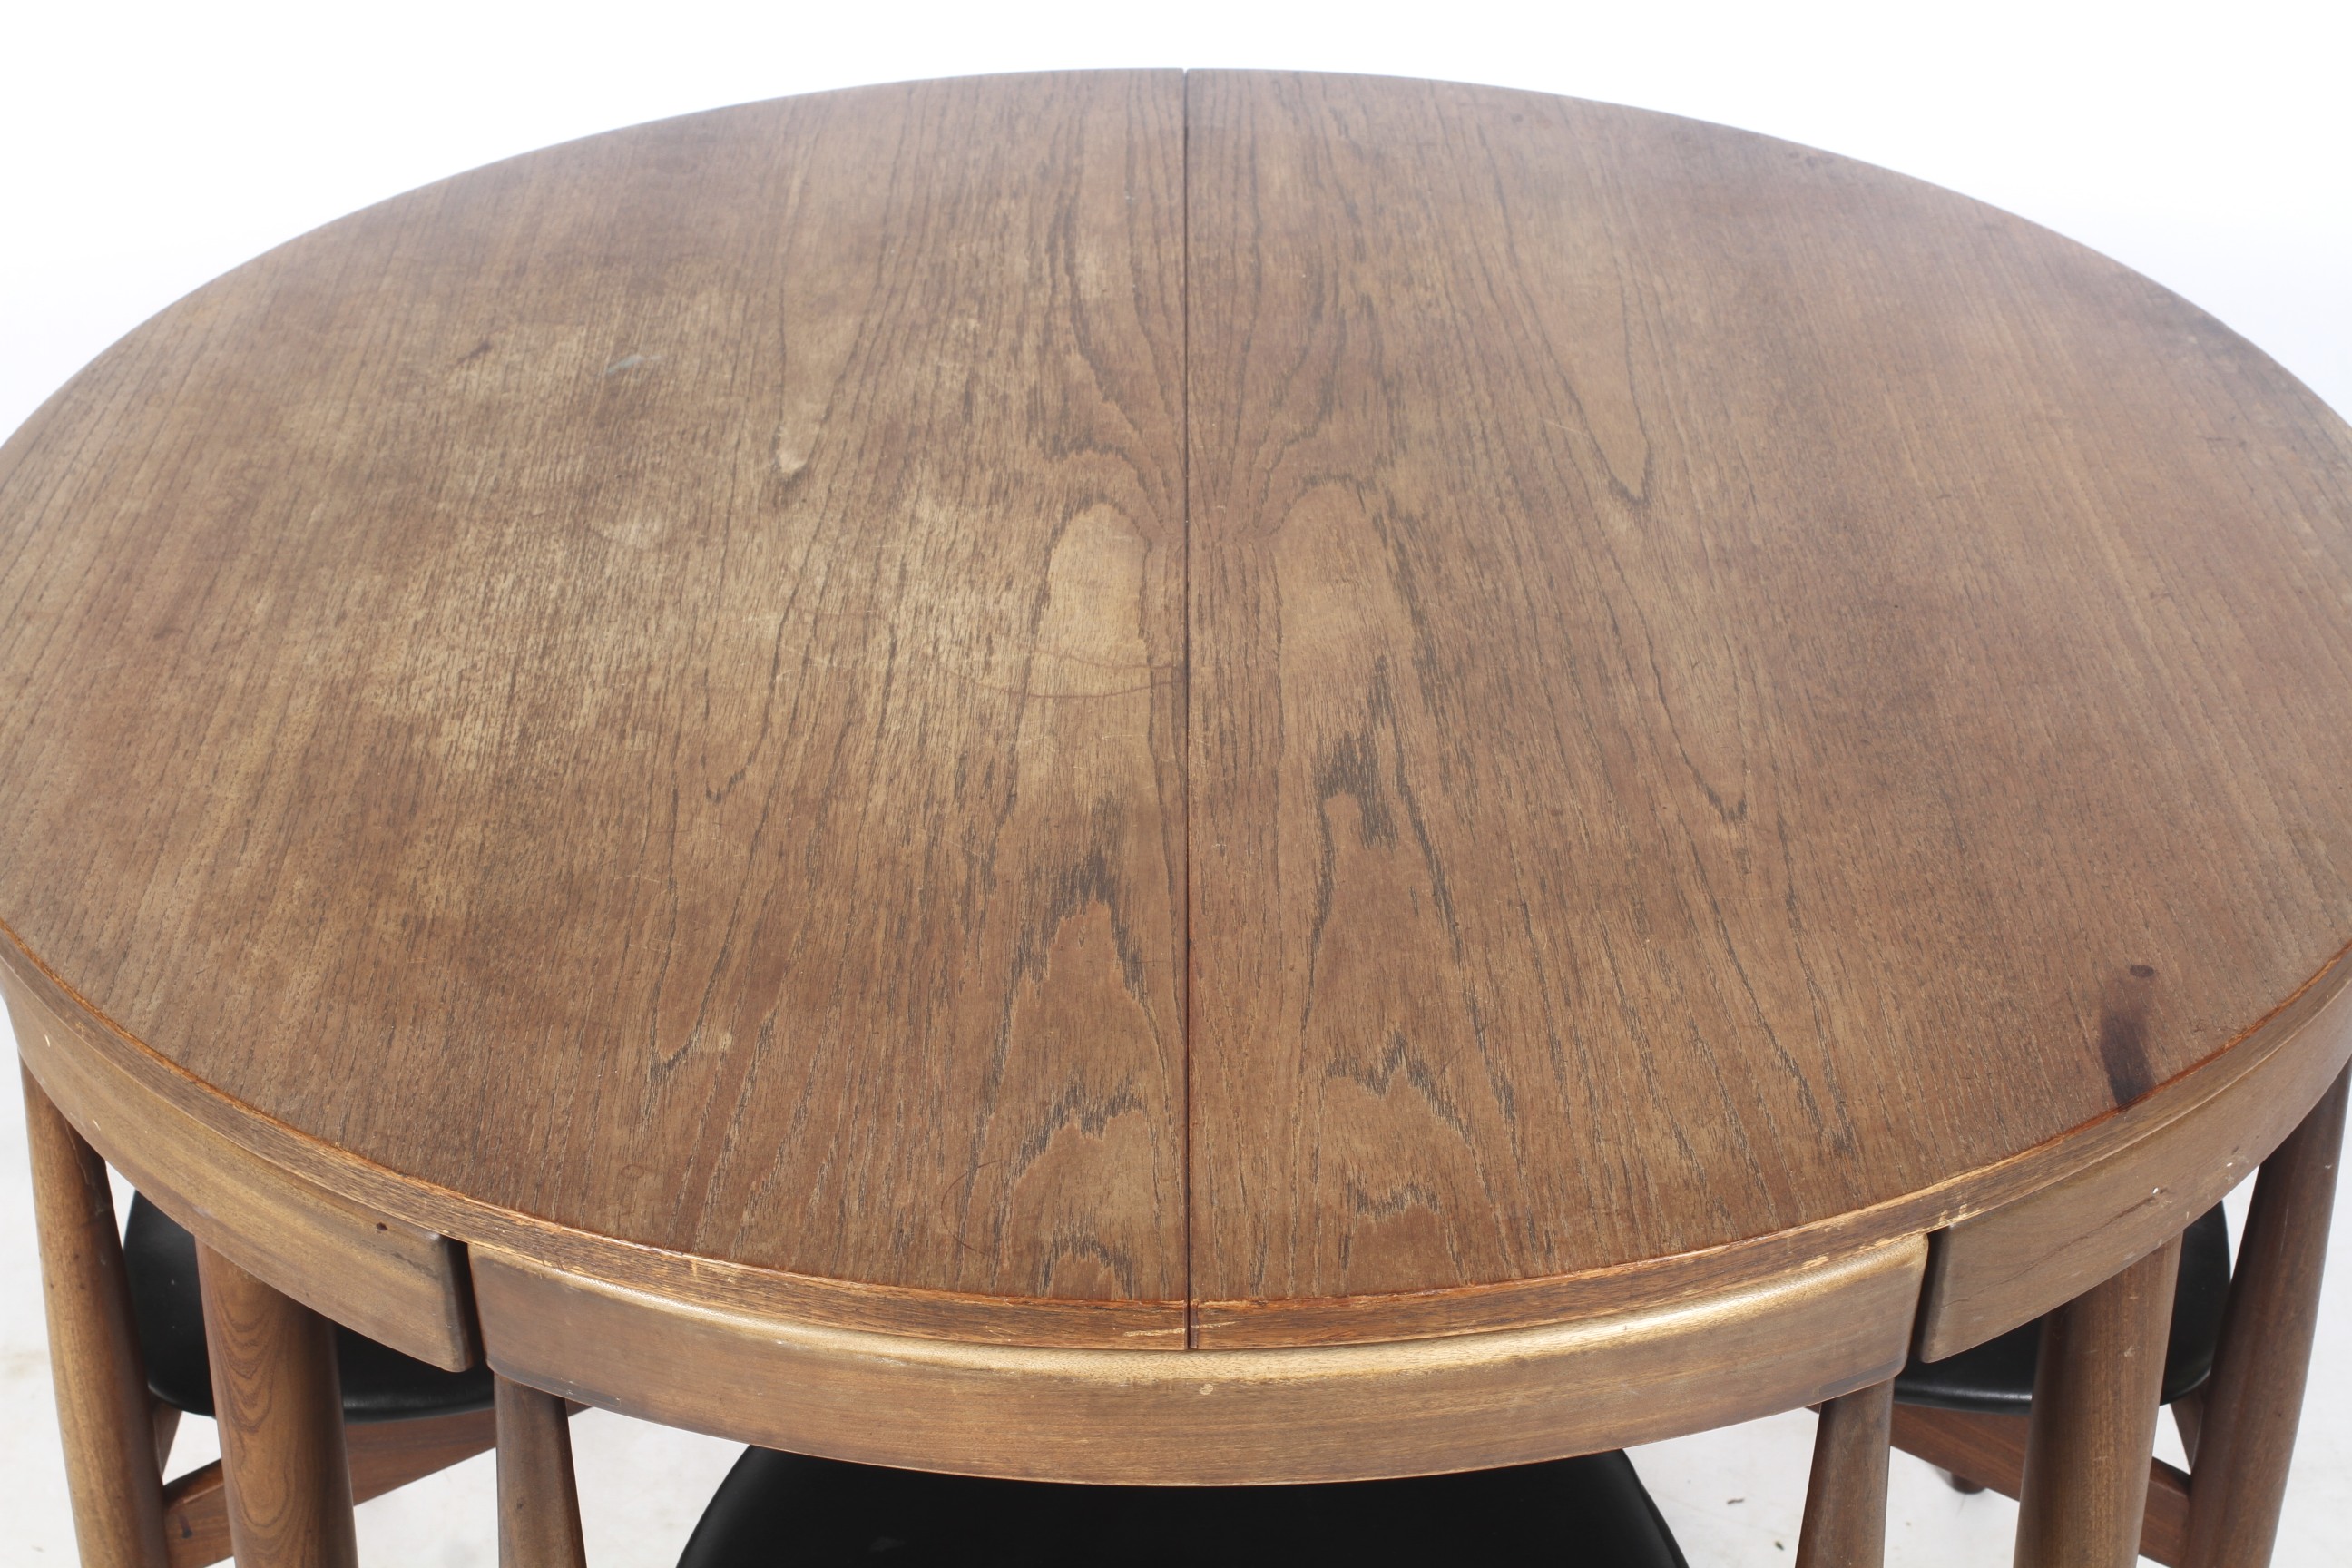 A 1960s Frem Rojle 'Roundette' extending teak table and five chairs by Hans Olsen. - Image 2 of 7